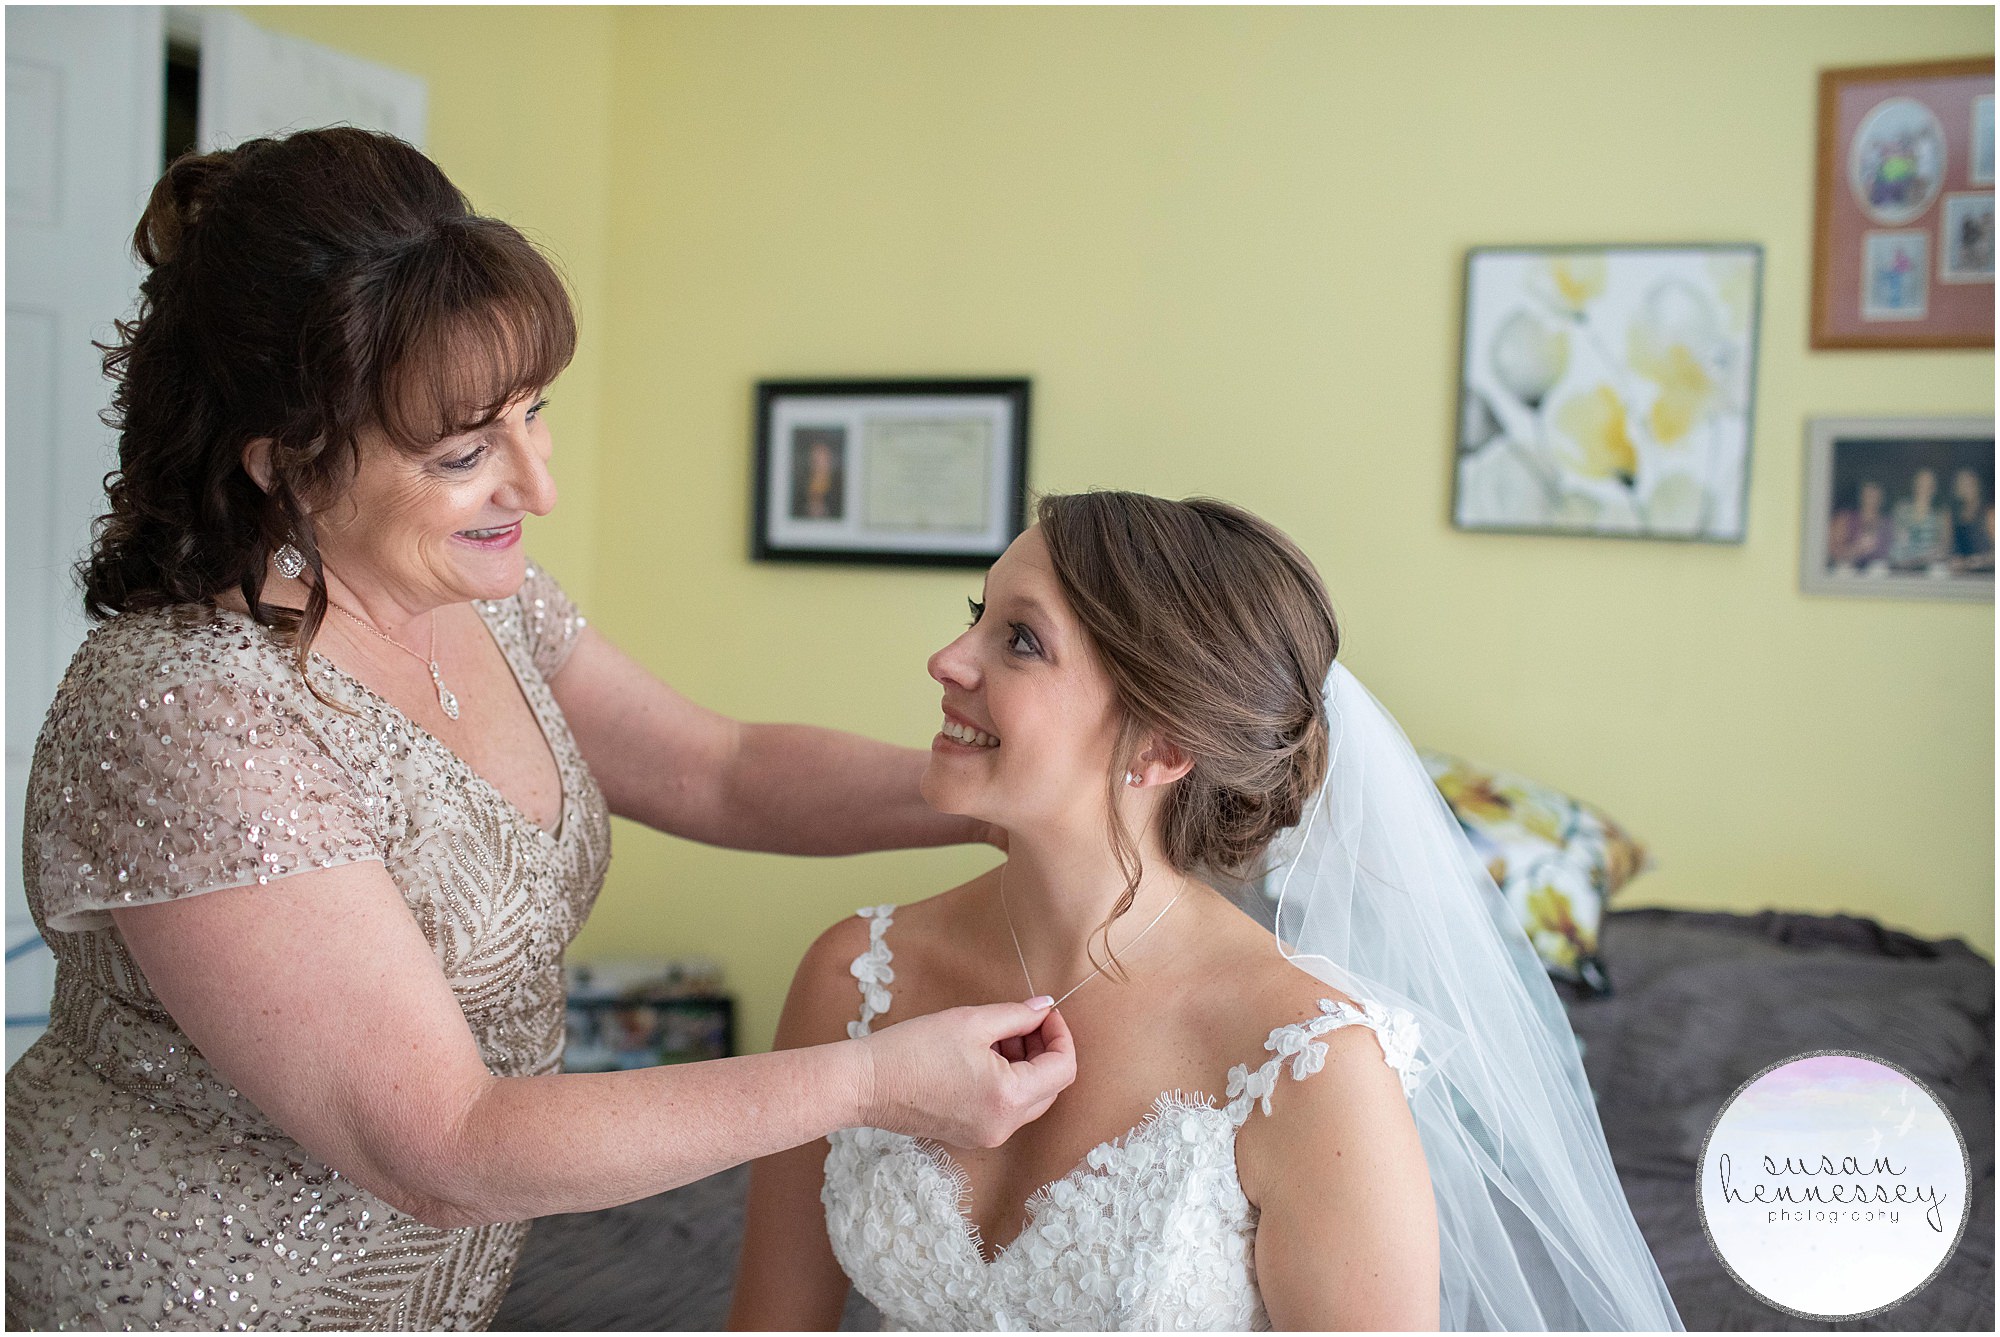 The bride's mother helps with her necklace.